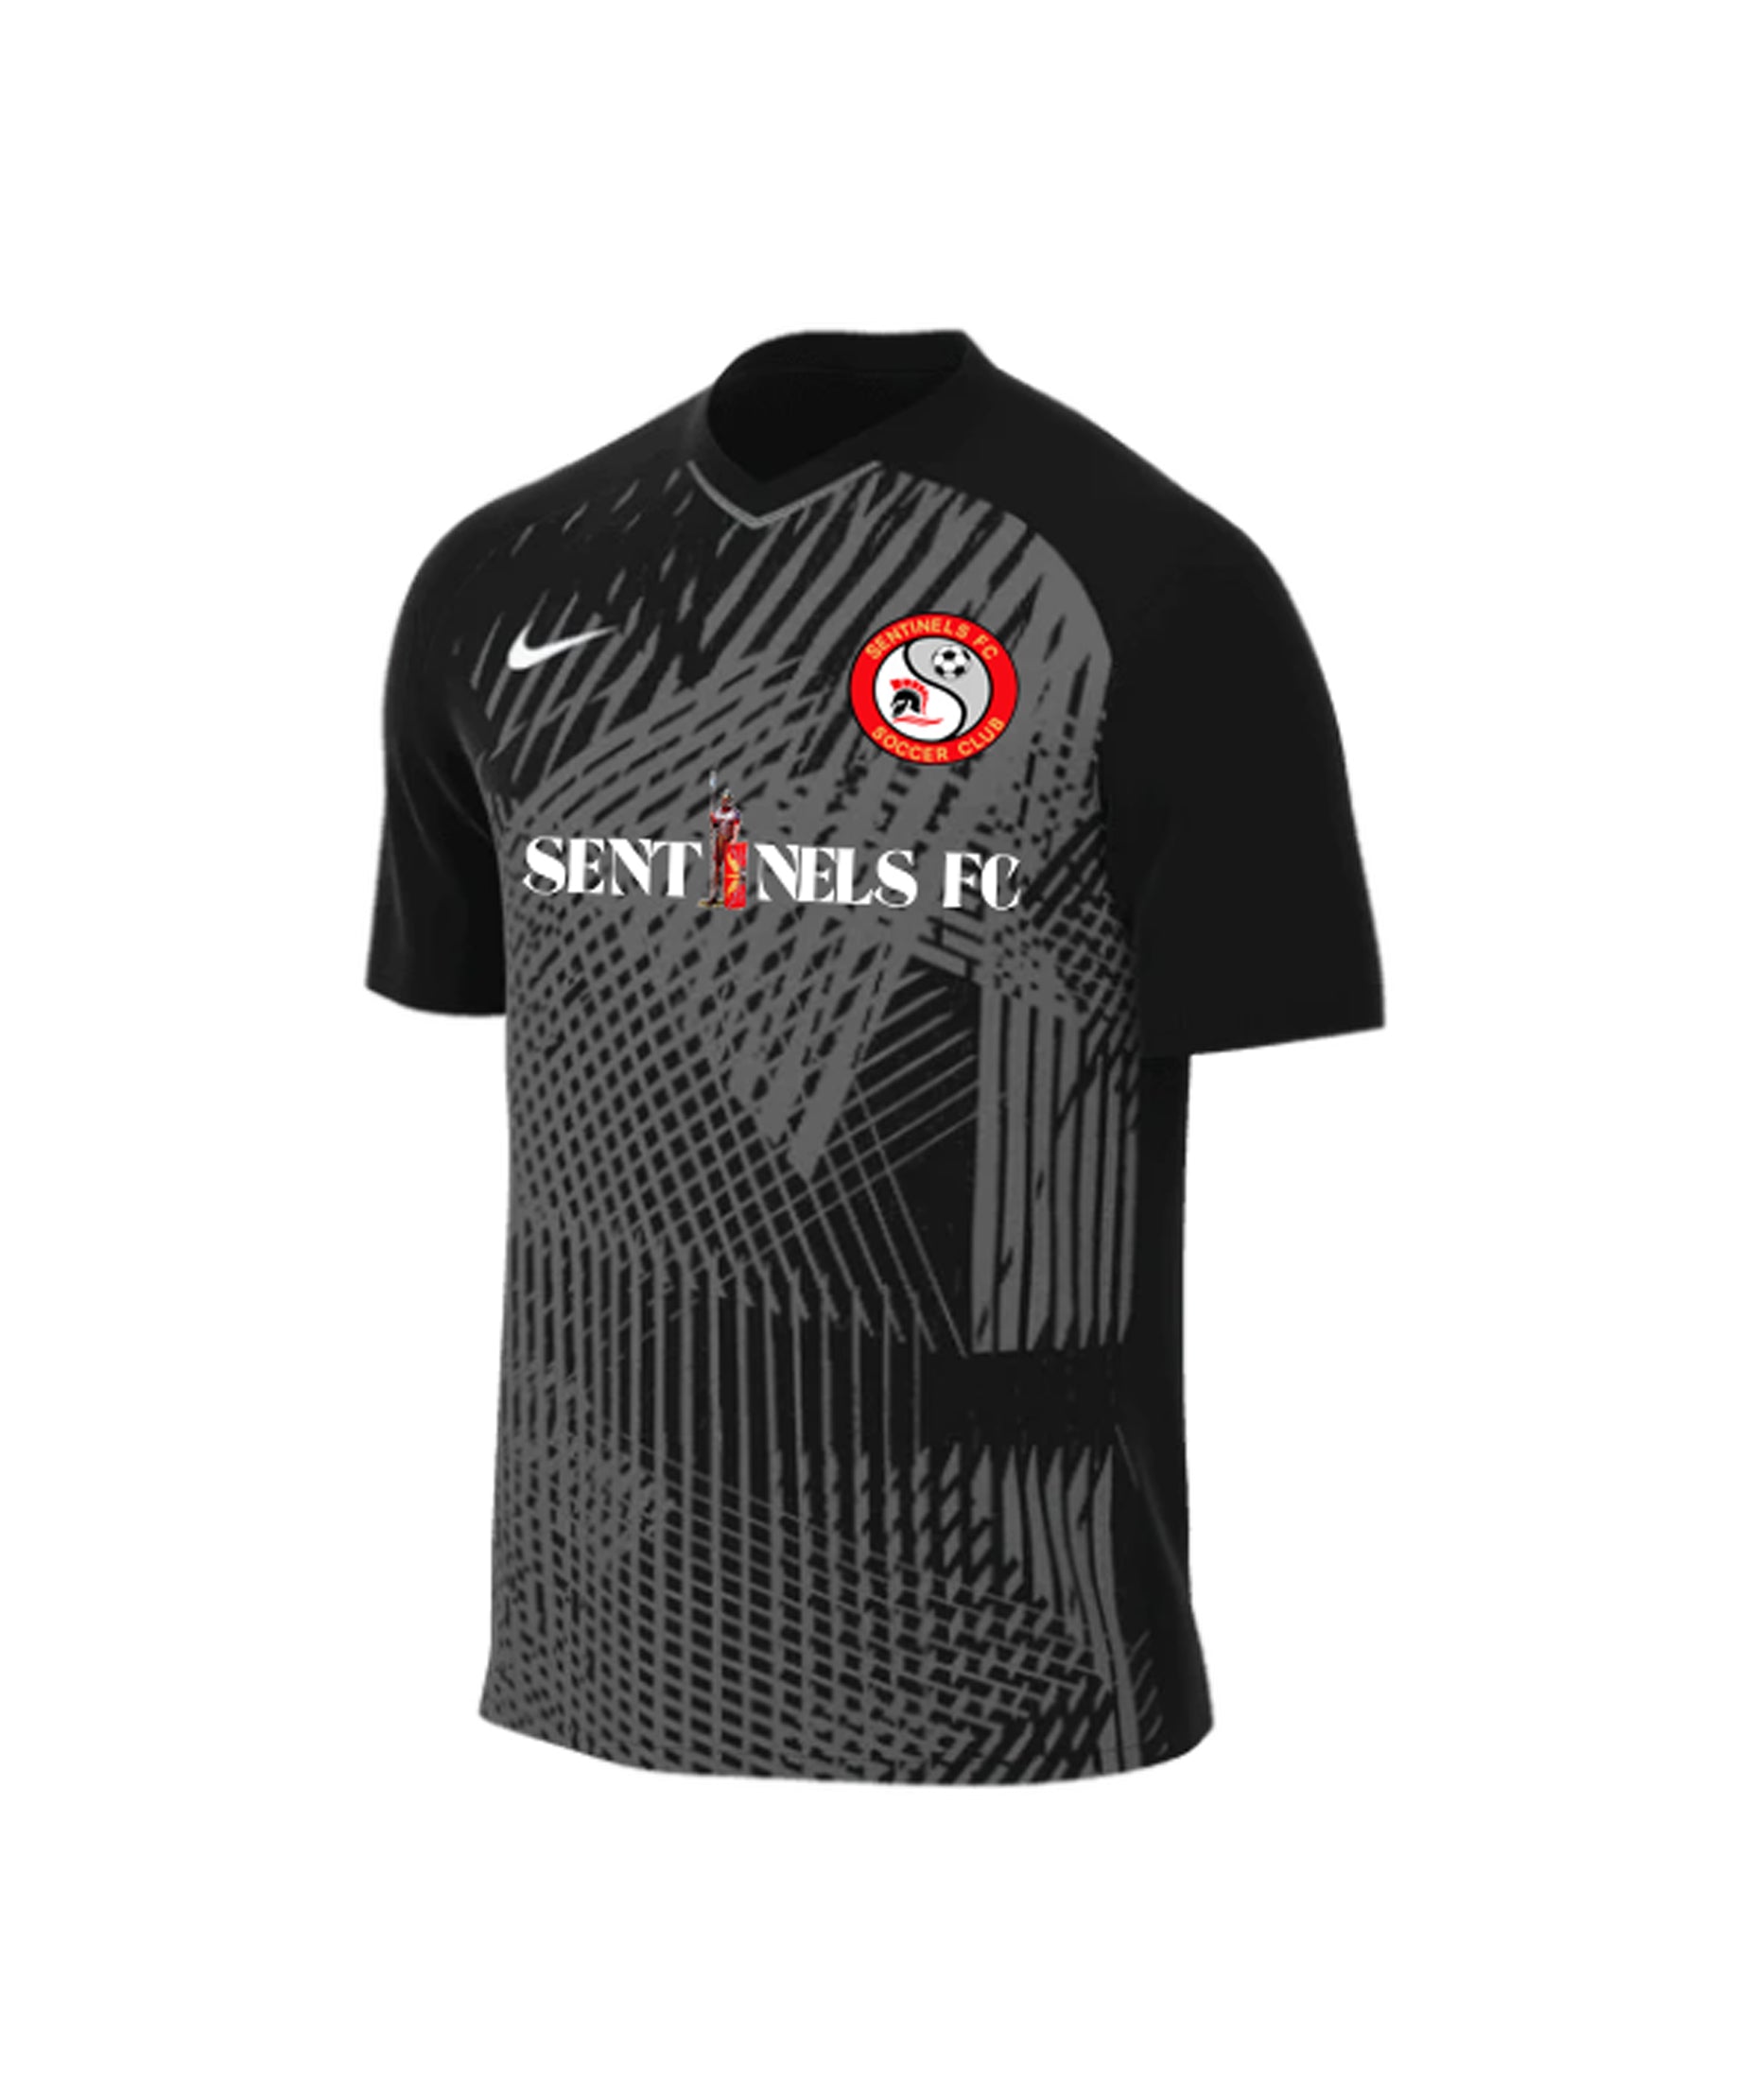 SENTINELS FC NIKE ADULT AND YOUTH PRECISION IV JERSEY - BLACK